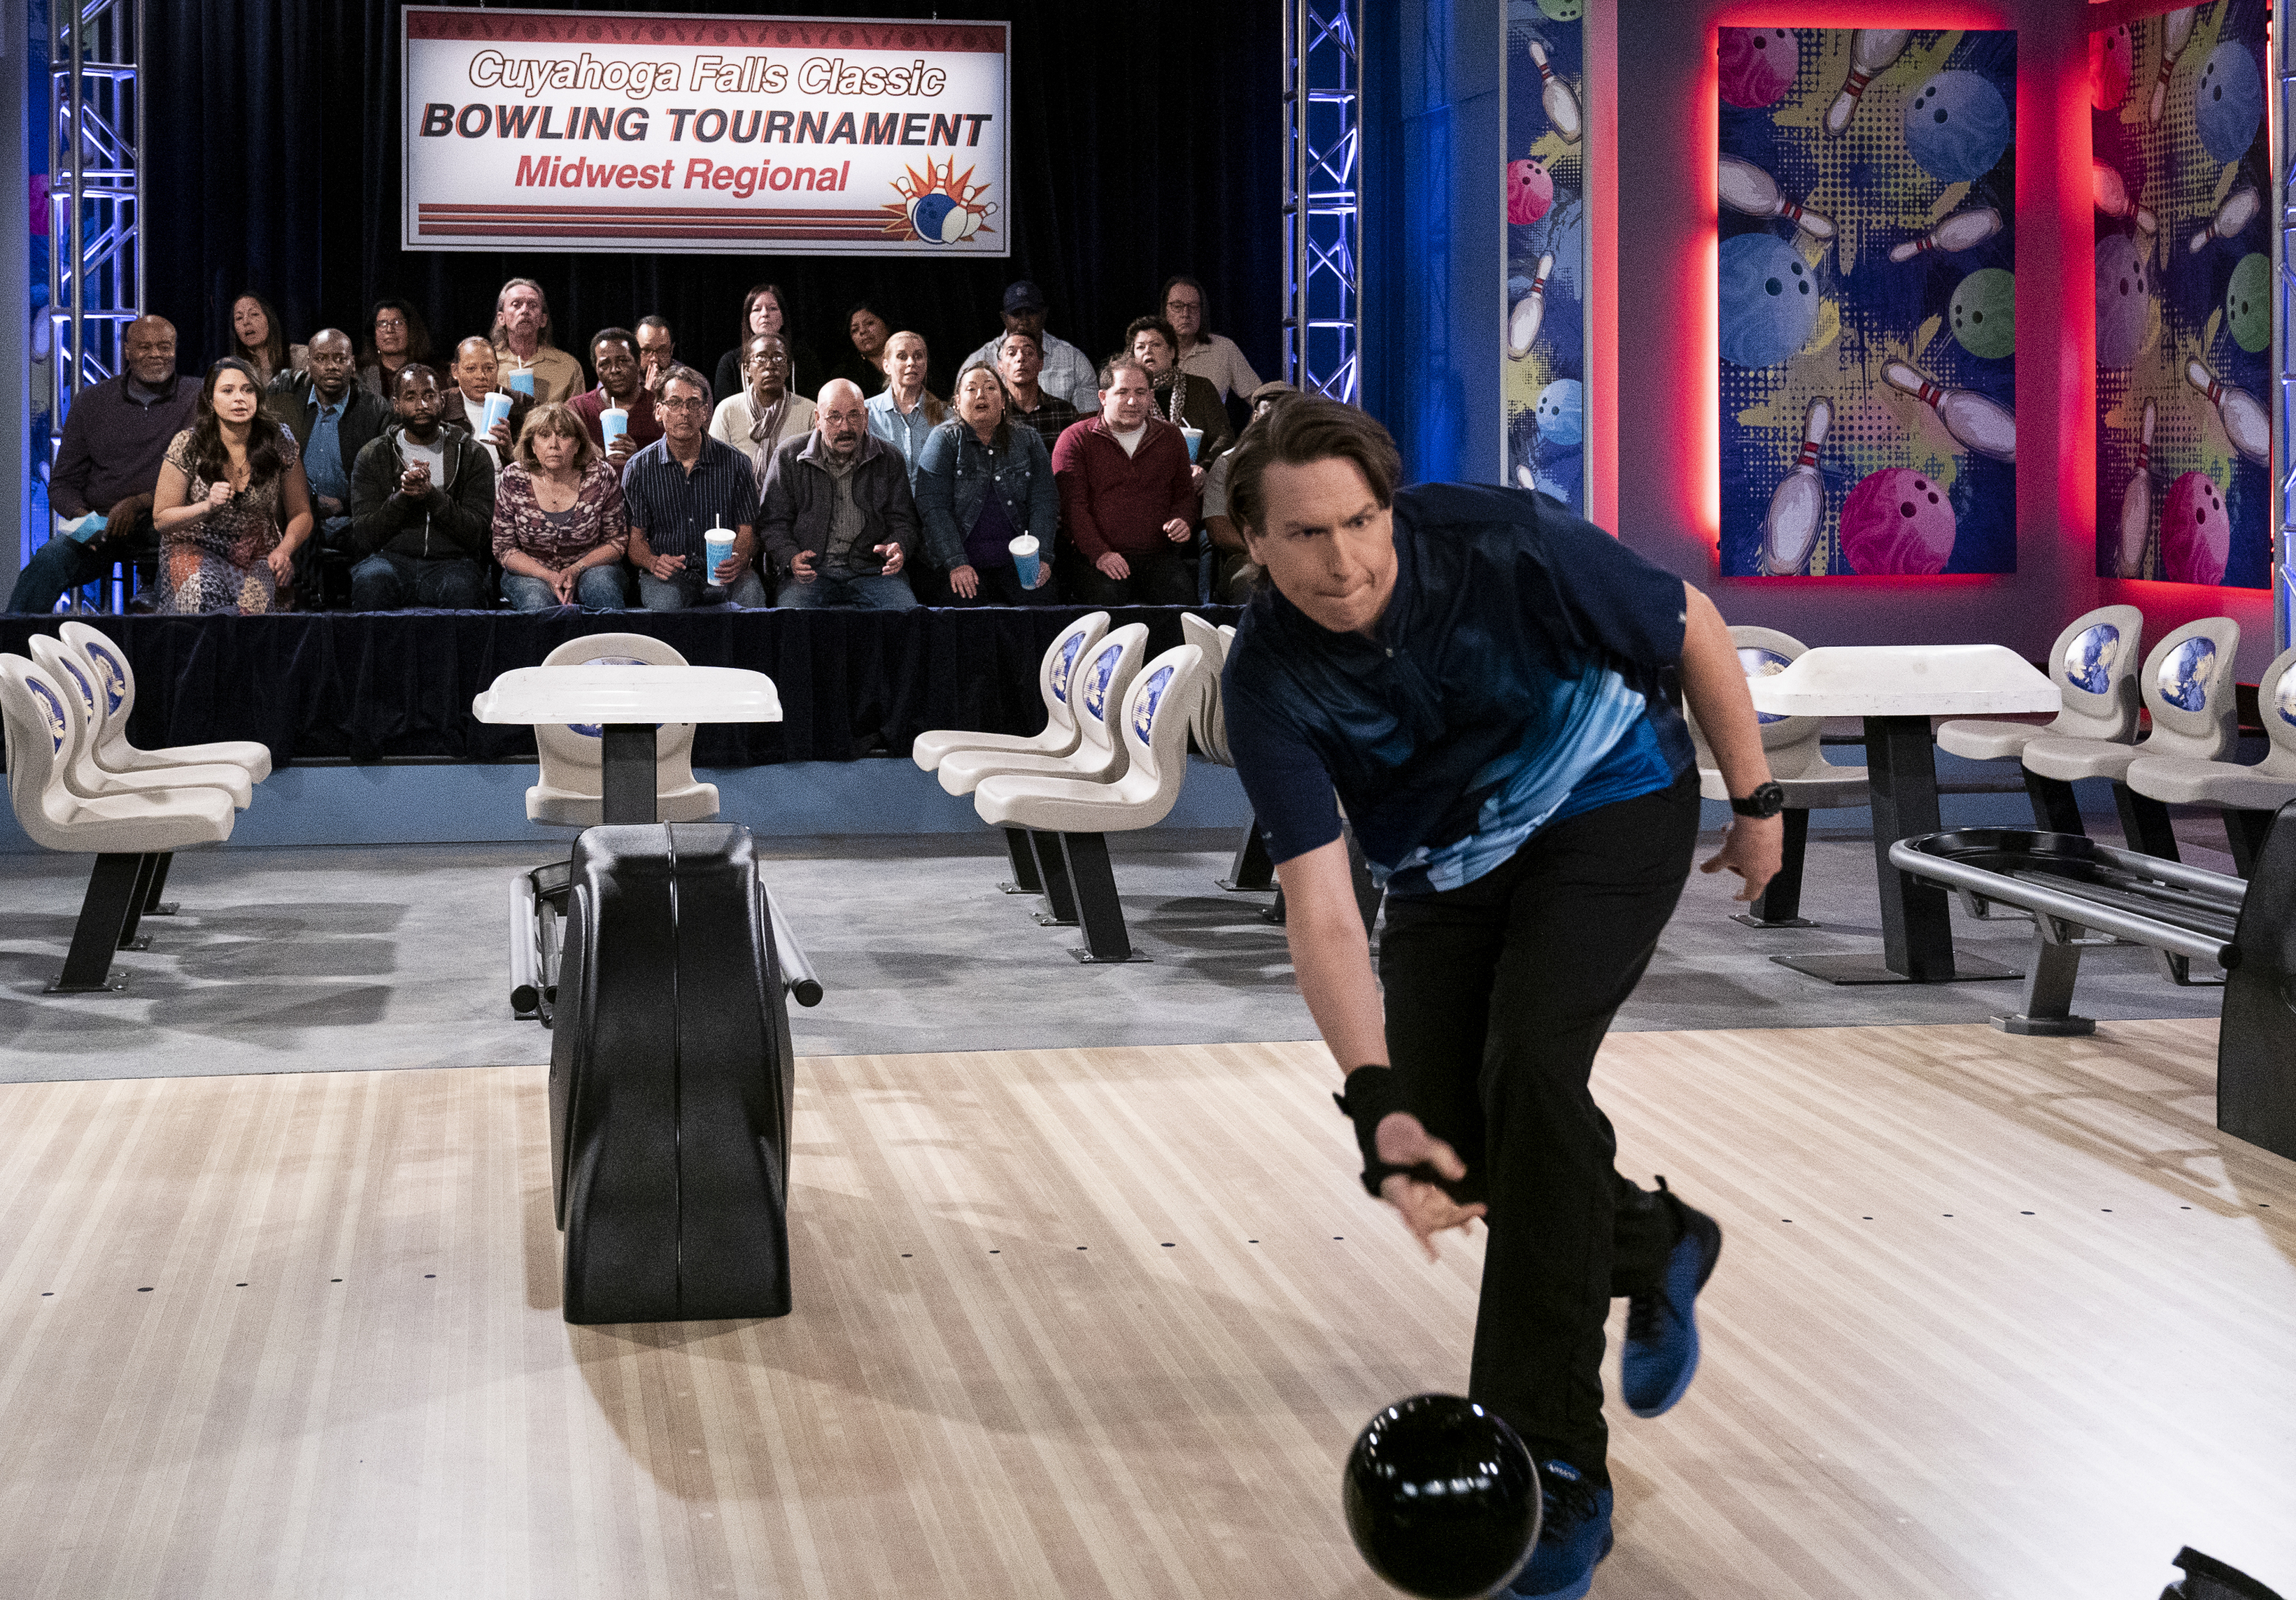 How We Roll hits CBS as network spins crazy rise of Saginaw bowler into newest sitcom